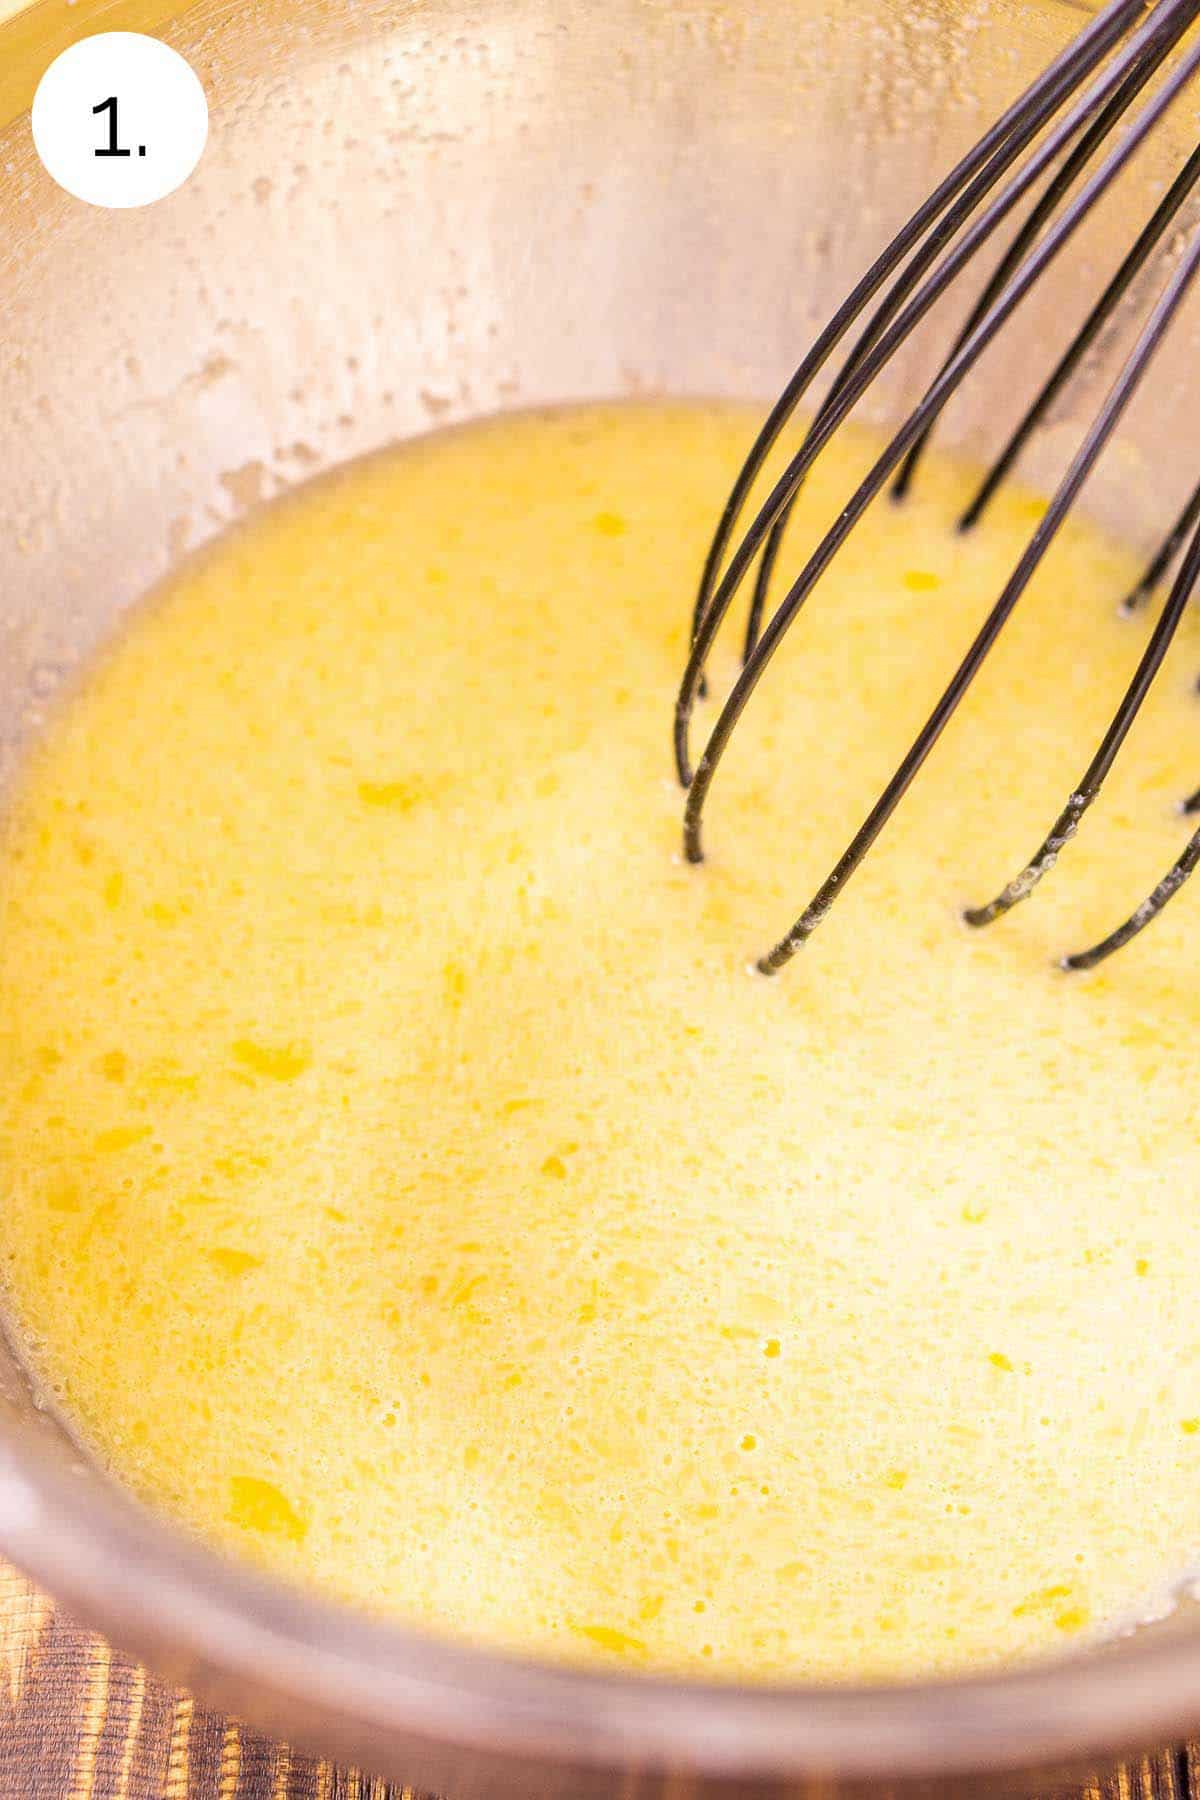 Whisking the wet ingredients together in a stainless steel mixing bowl on a wooden surface.